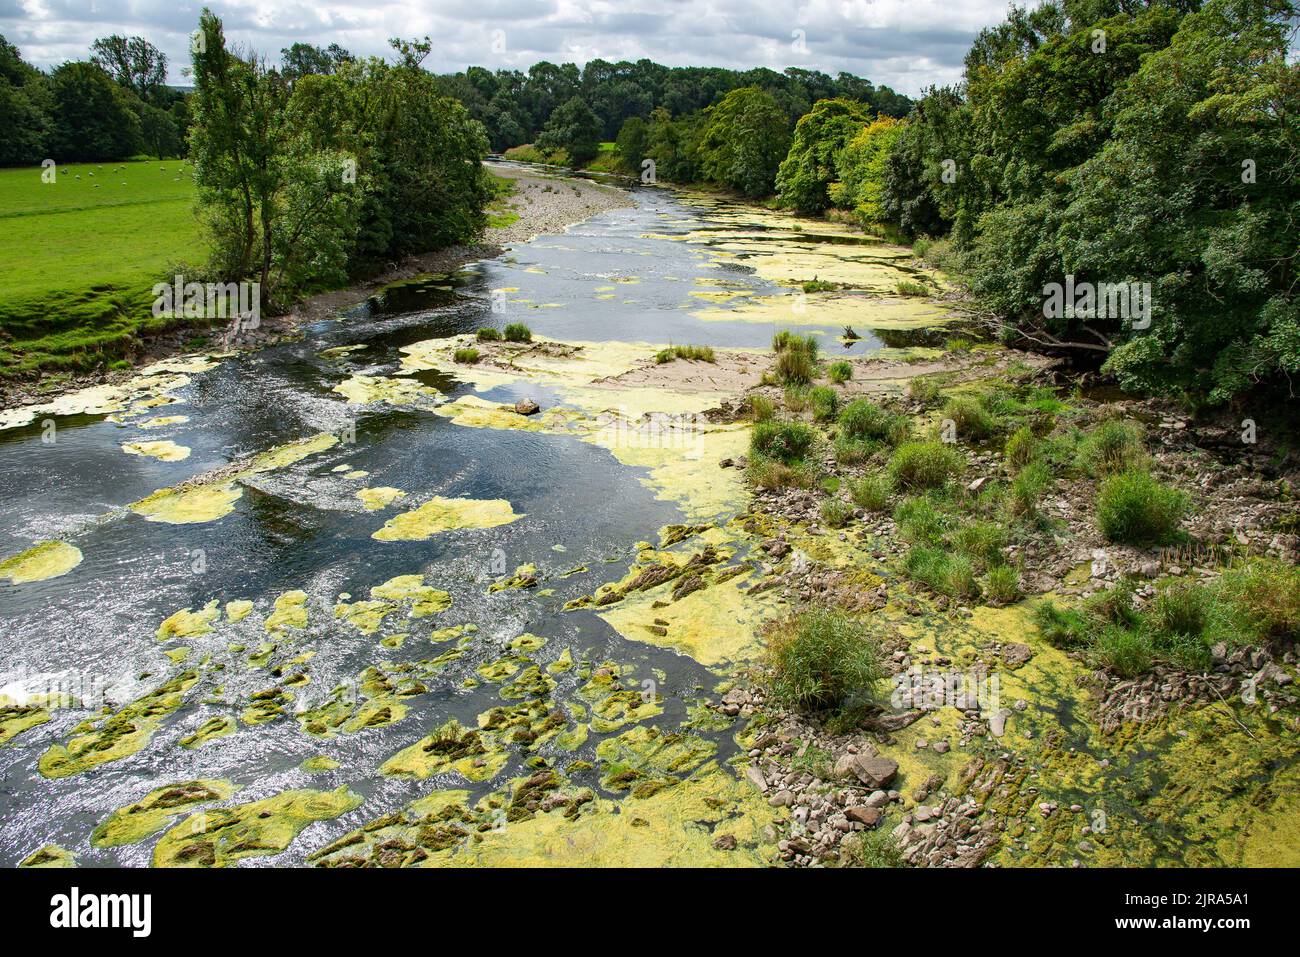 Algae and weed affecting the River Ribble at Mitton, Clitheroe, Lancashire, UK. Stock Photo